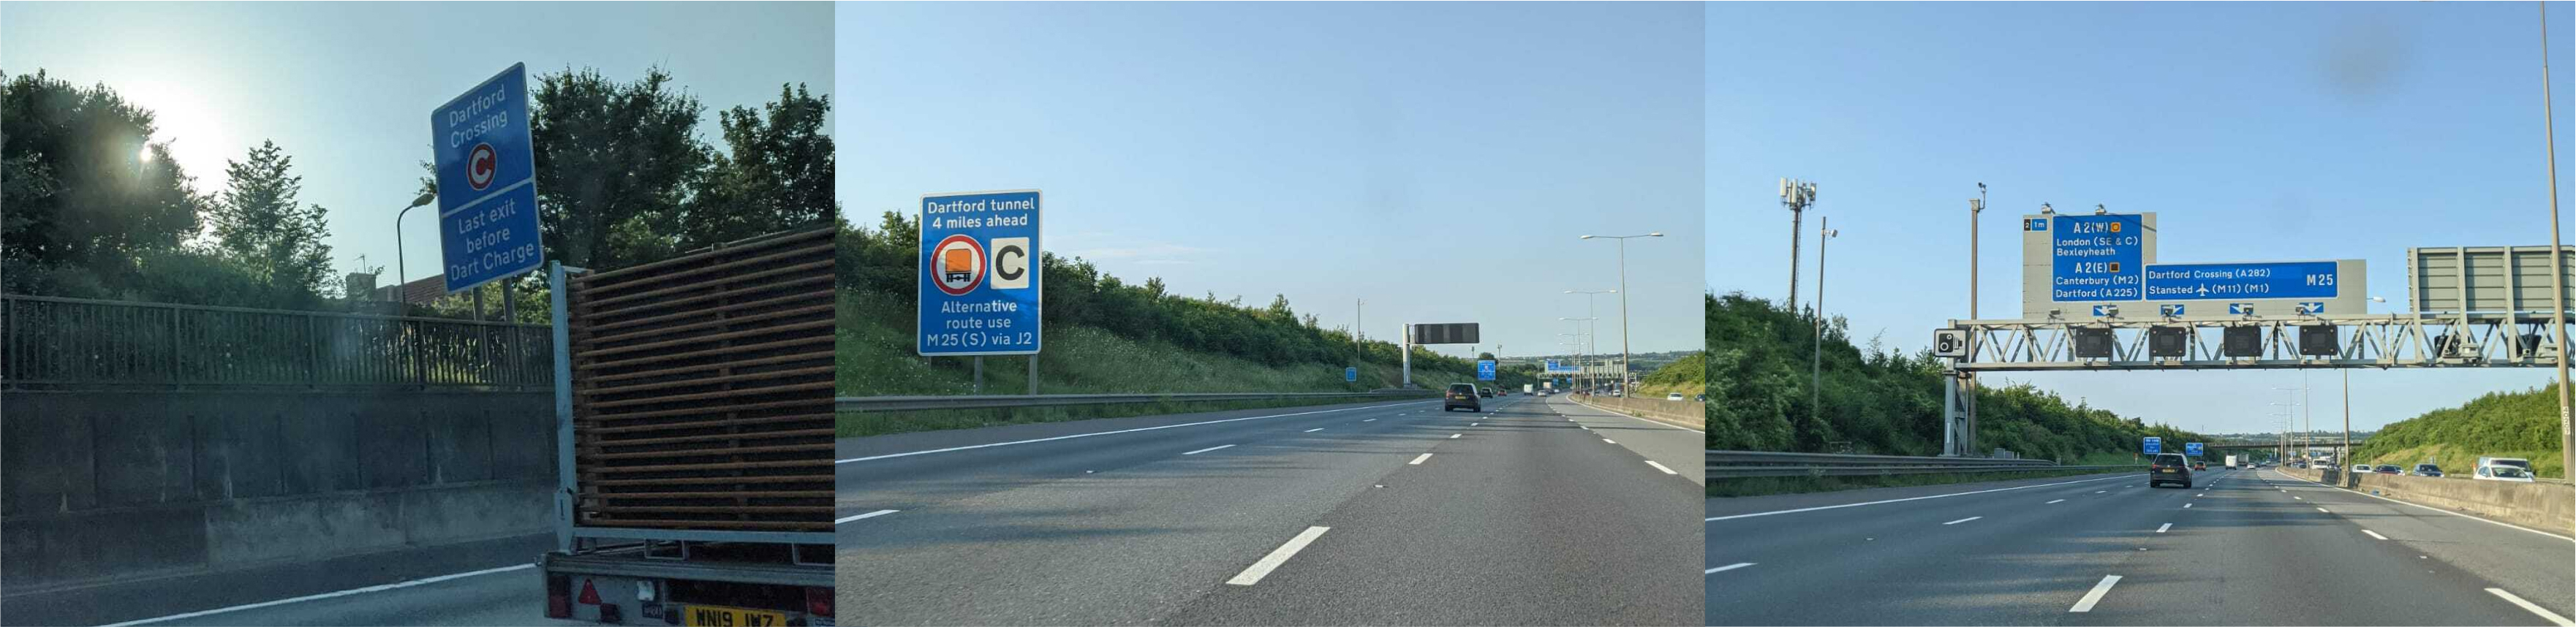 Various views that drivers see on the road when approaching the Dartford Crossing, with signs to remind them that the crossing is coming up.